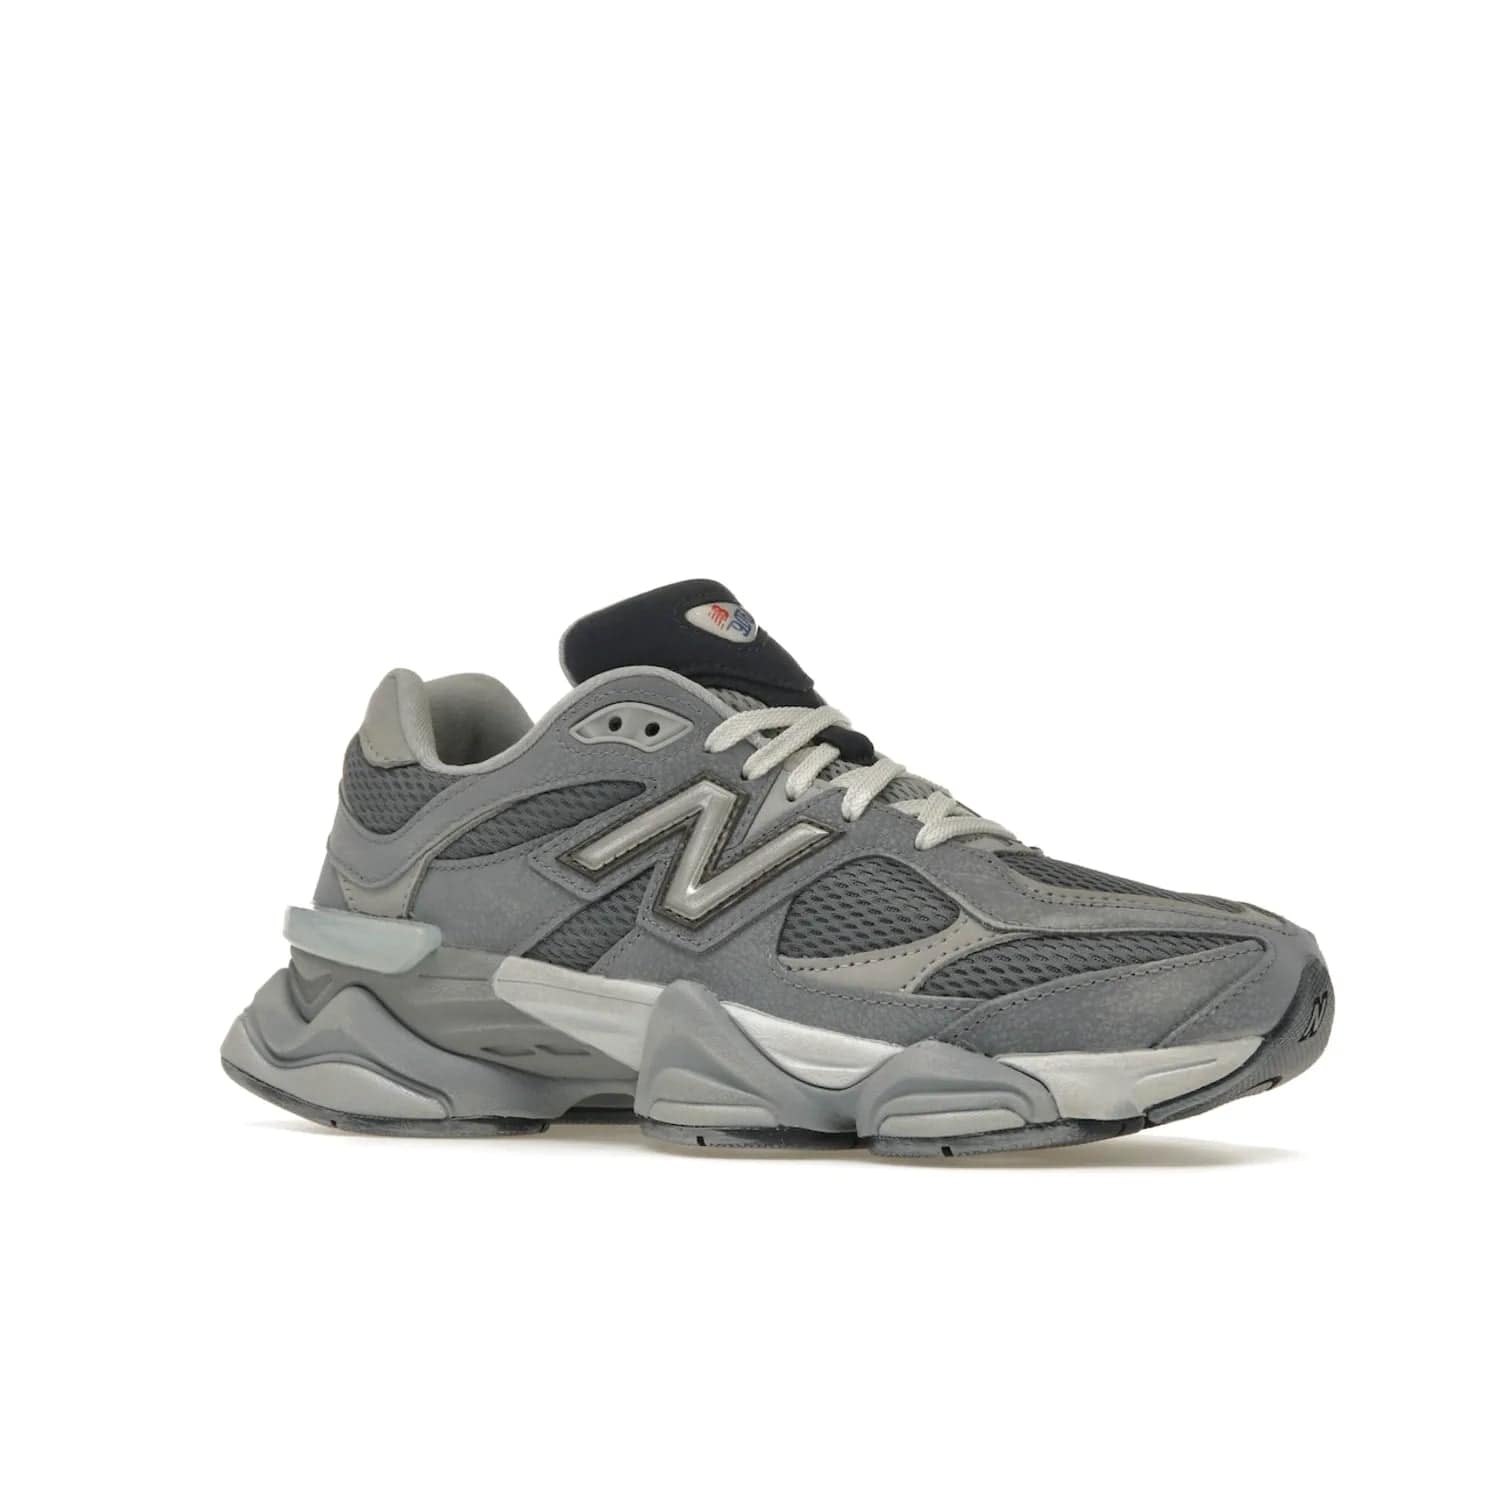 New Balance 9060 Grey Day (2023) - Image 4 - Only at www.BallersClubKickz.com - #
Sporty-meets-stylish in the New Balance 9060 Grey Day sneaker. Designed with Arctic Grey, Steel, and Silver Metallic, it offers an edgy but wearable look along with classic NB comfort and quality.